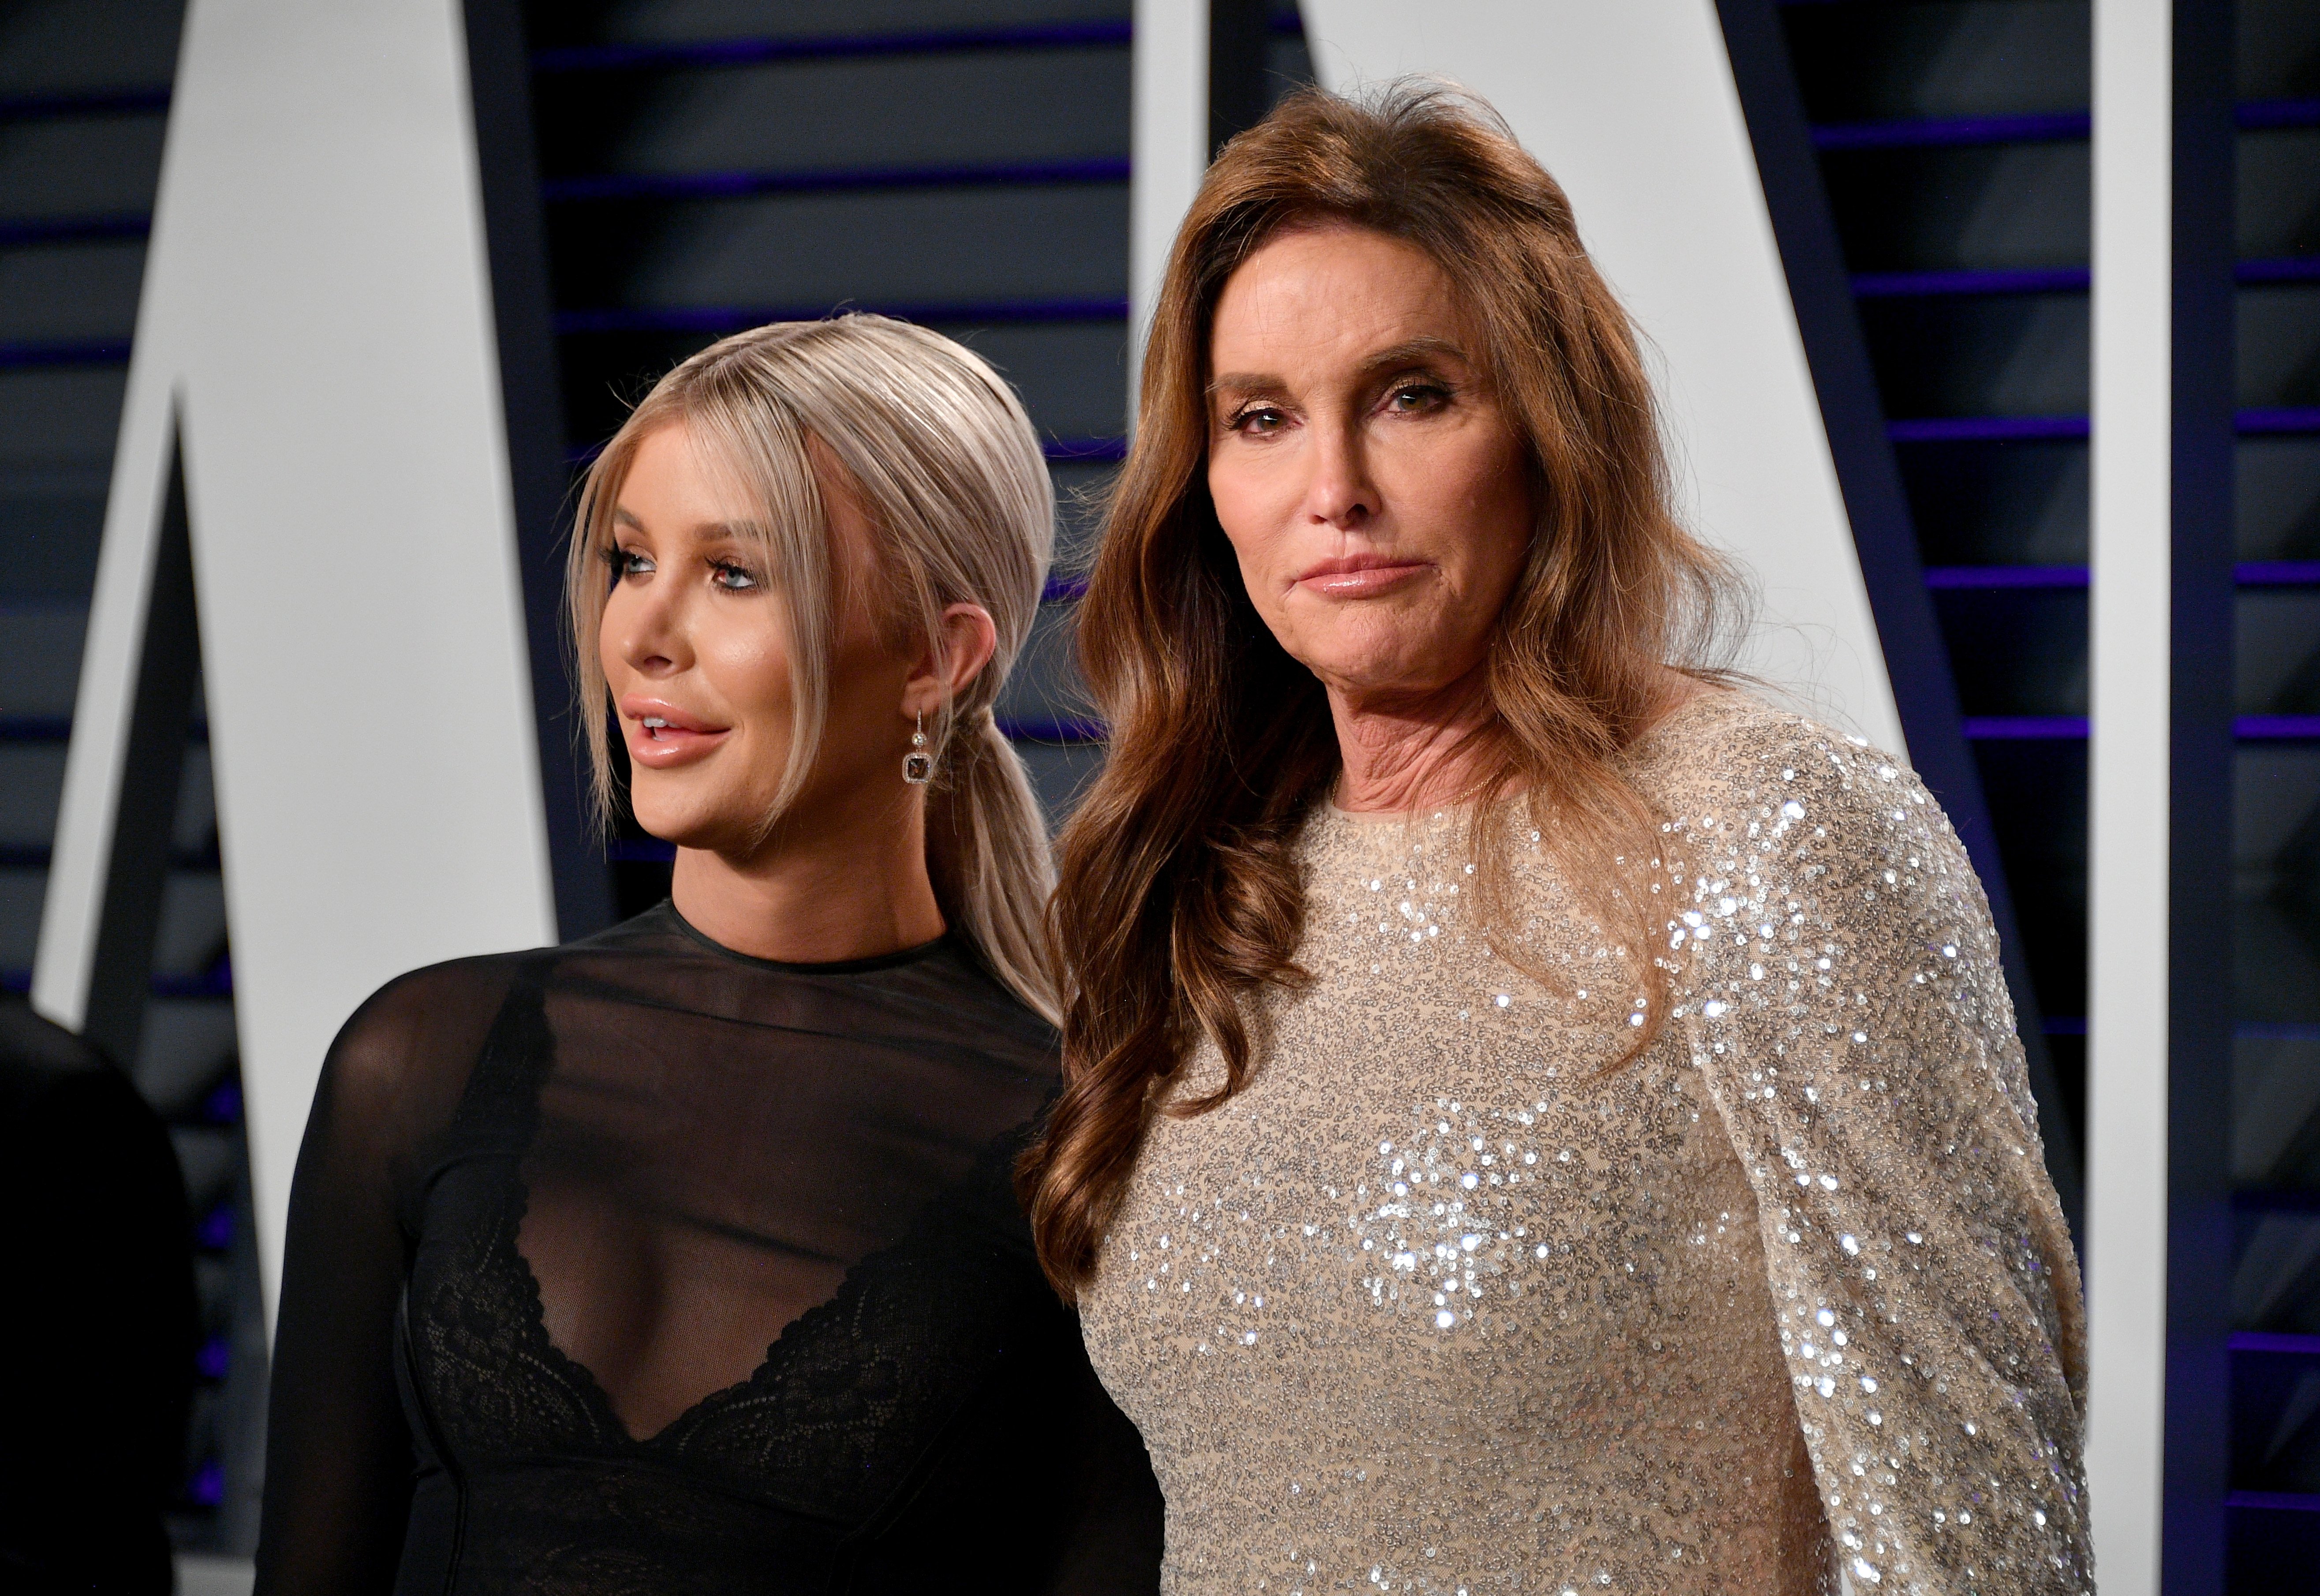 Caitlyn Jenner and Sophia Hutchins attend the Oscars Party in 2019  | Photo: Getty Images